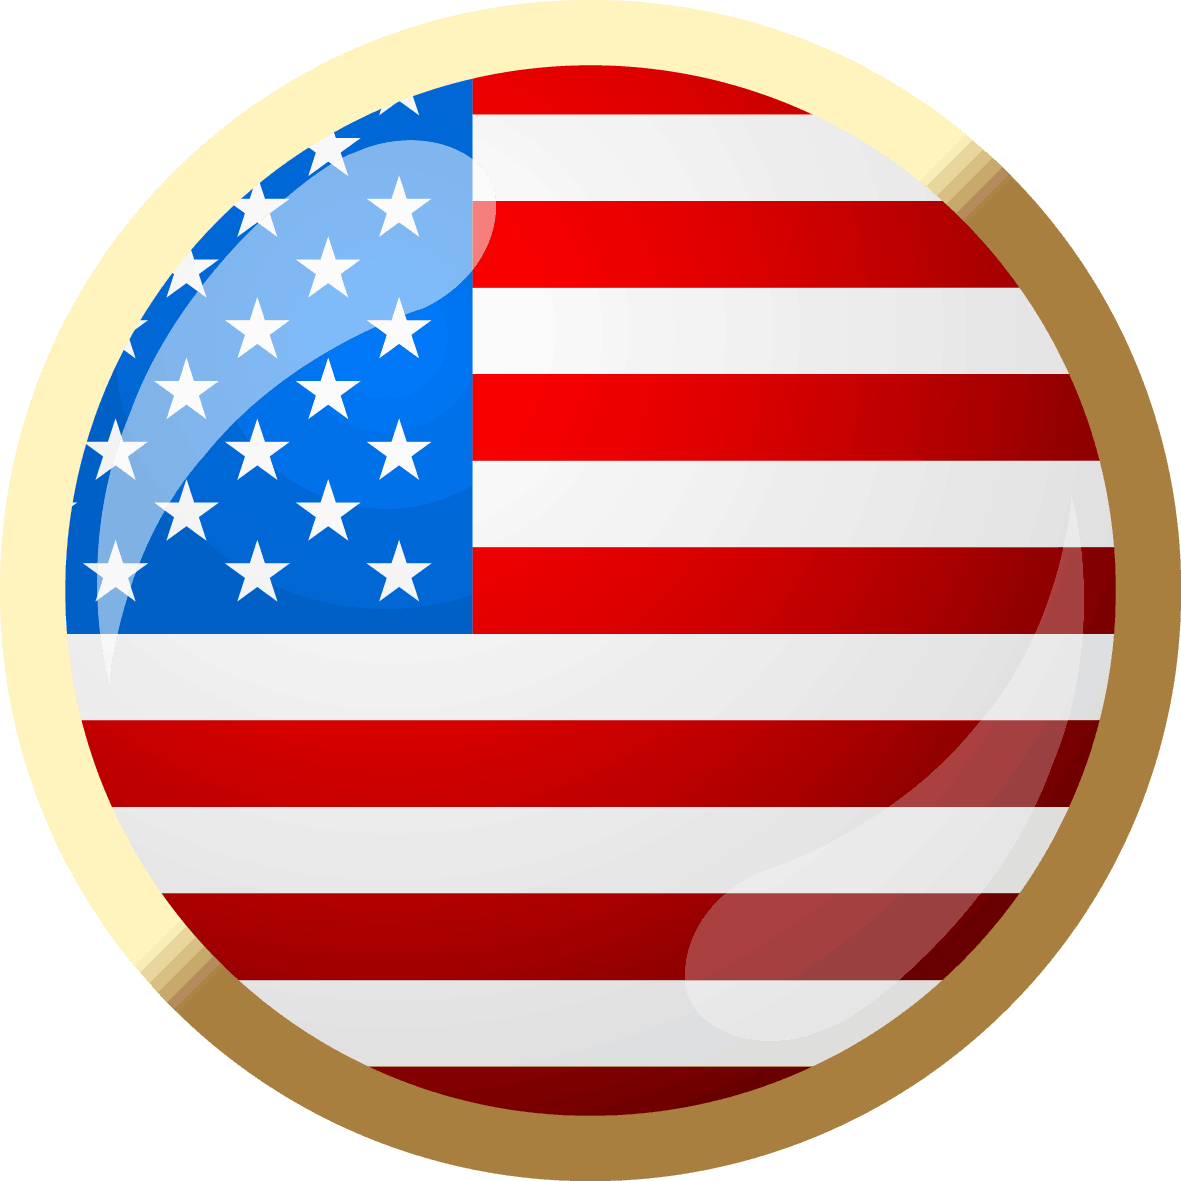 united states clipart game